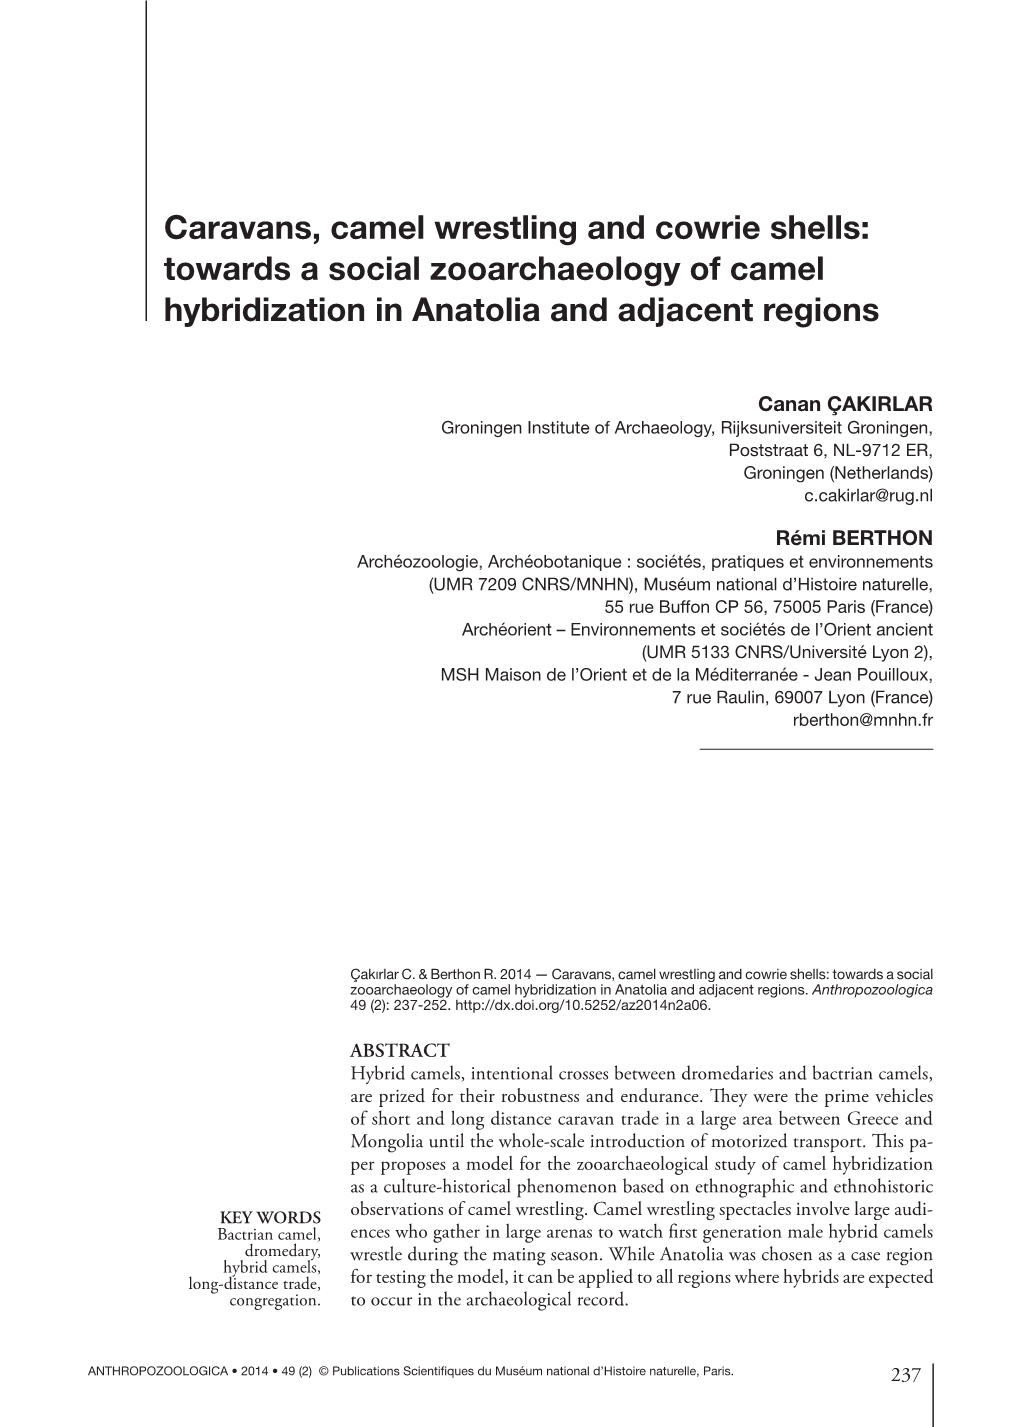 Caravans, Camel Wrestling and Cowrie Shells: Towards a Social Zooarchaeology of Camel Hybridization in Anatolia and Adjacent Regions